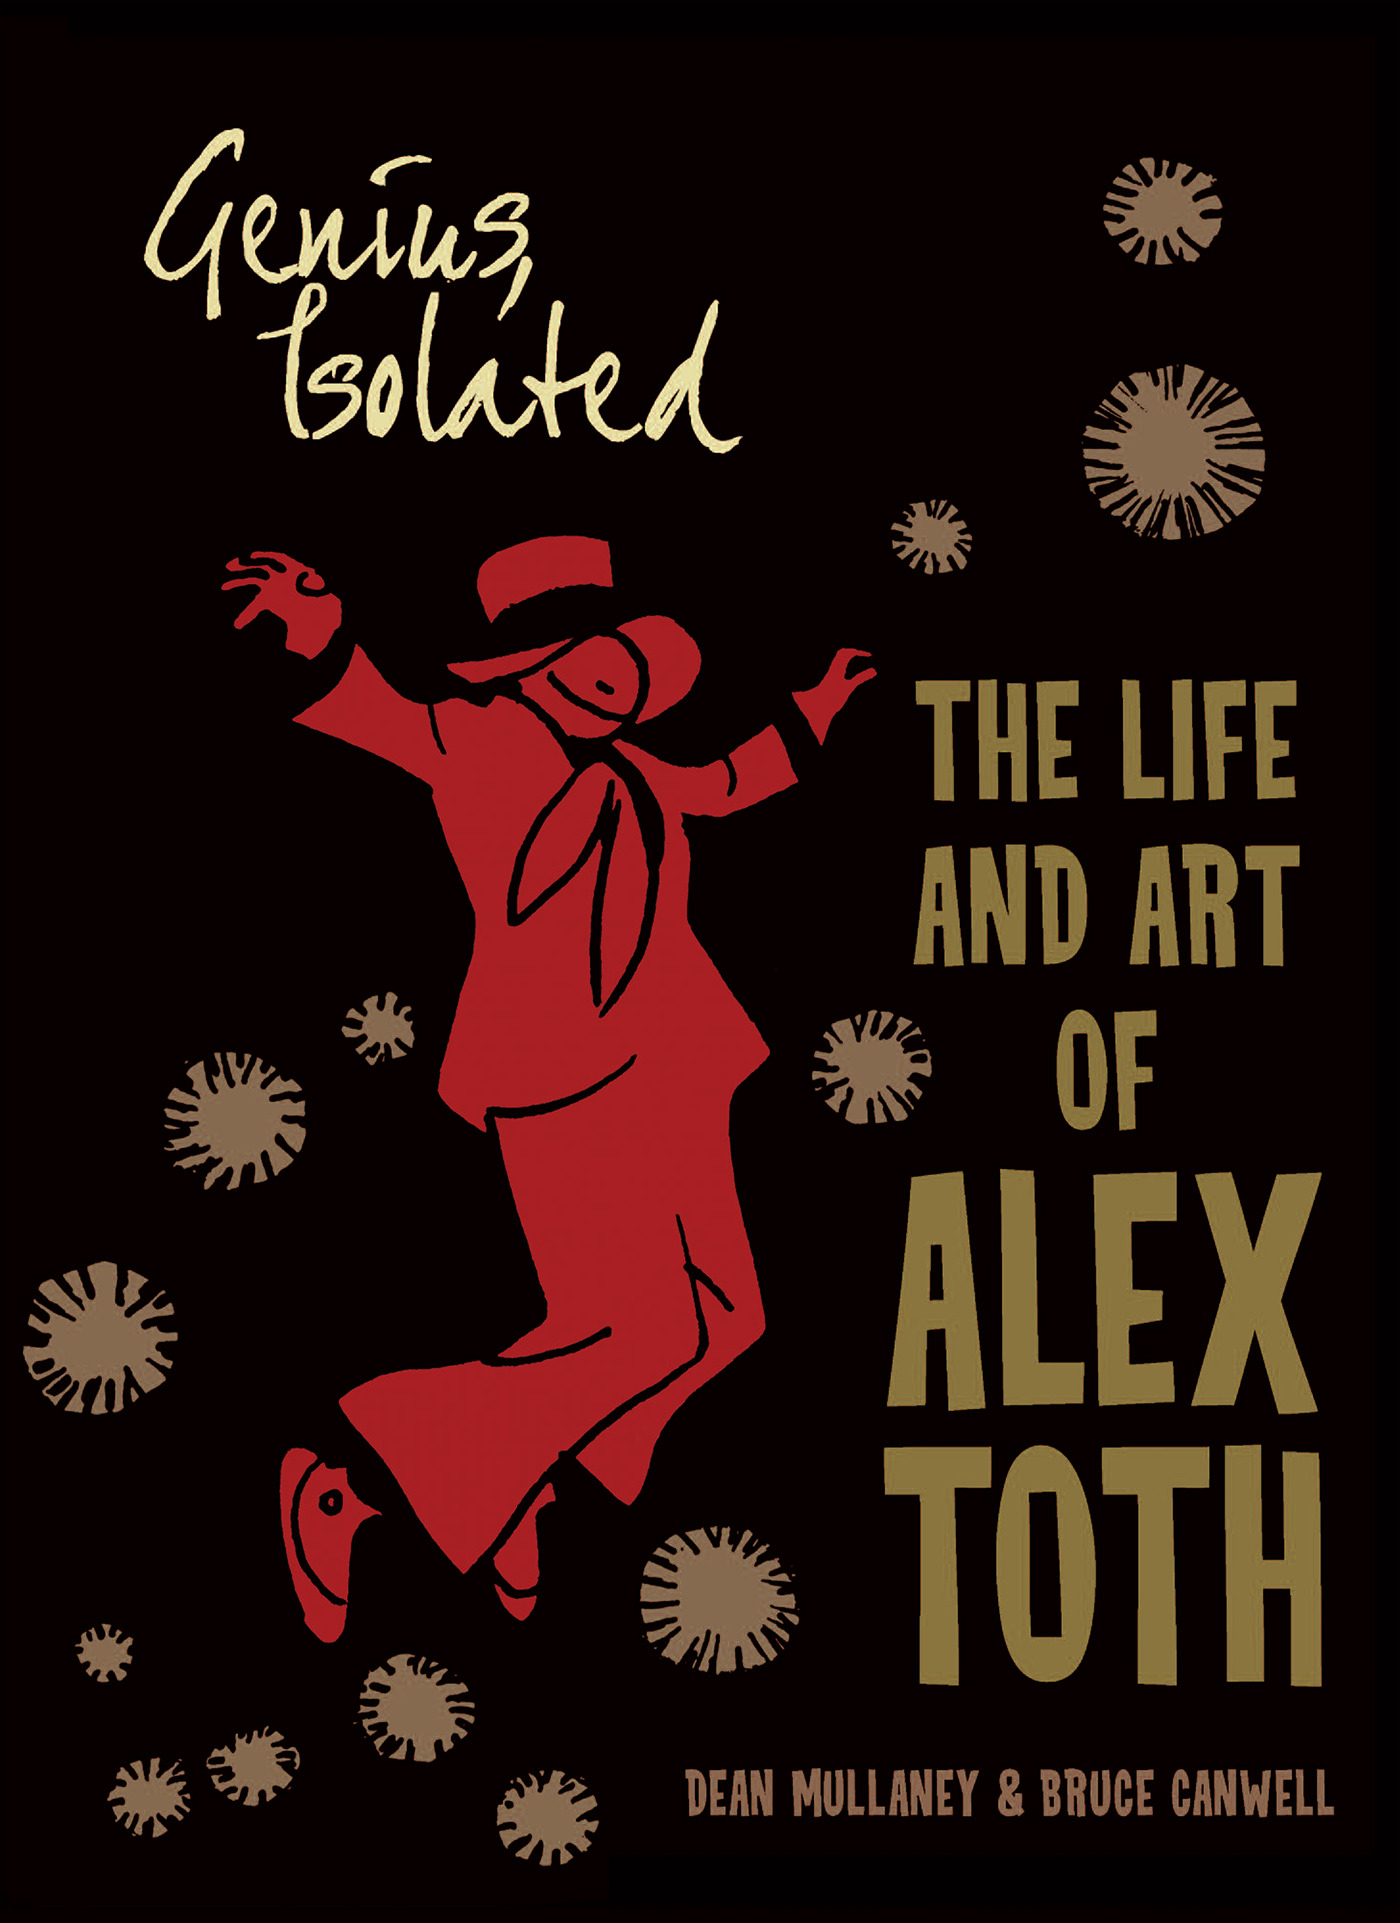 Genius Isolated The Life & Art of Alex Toth Soft Cover